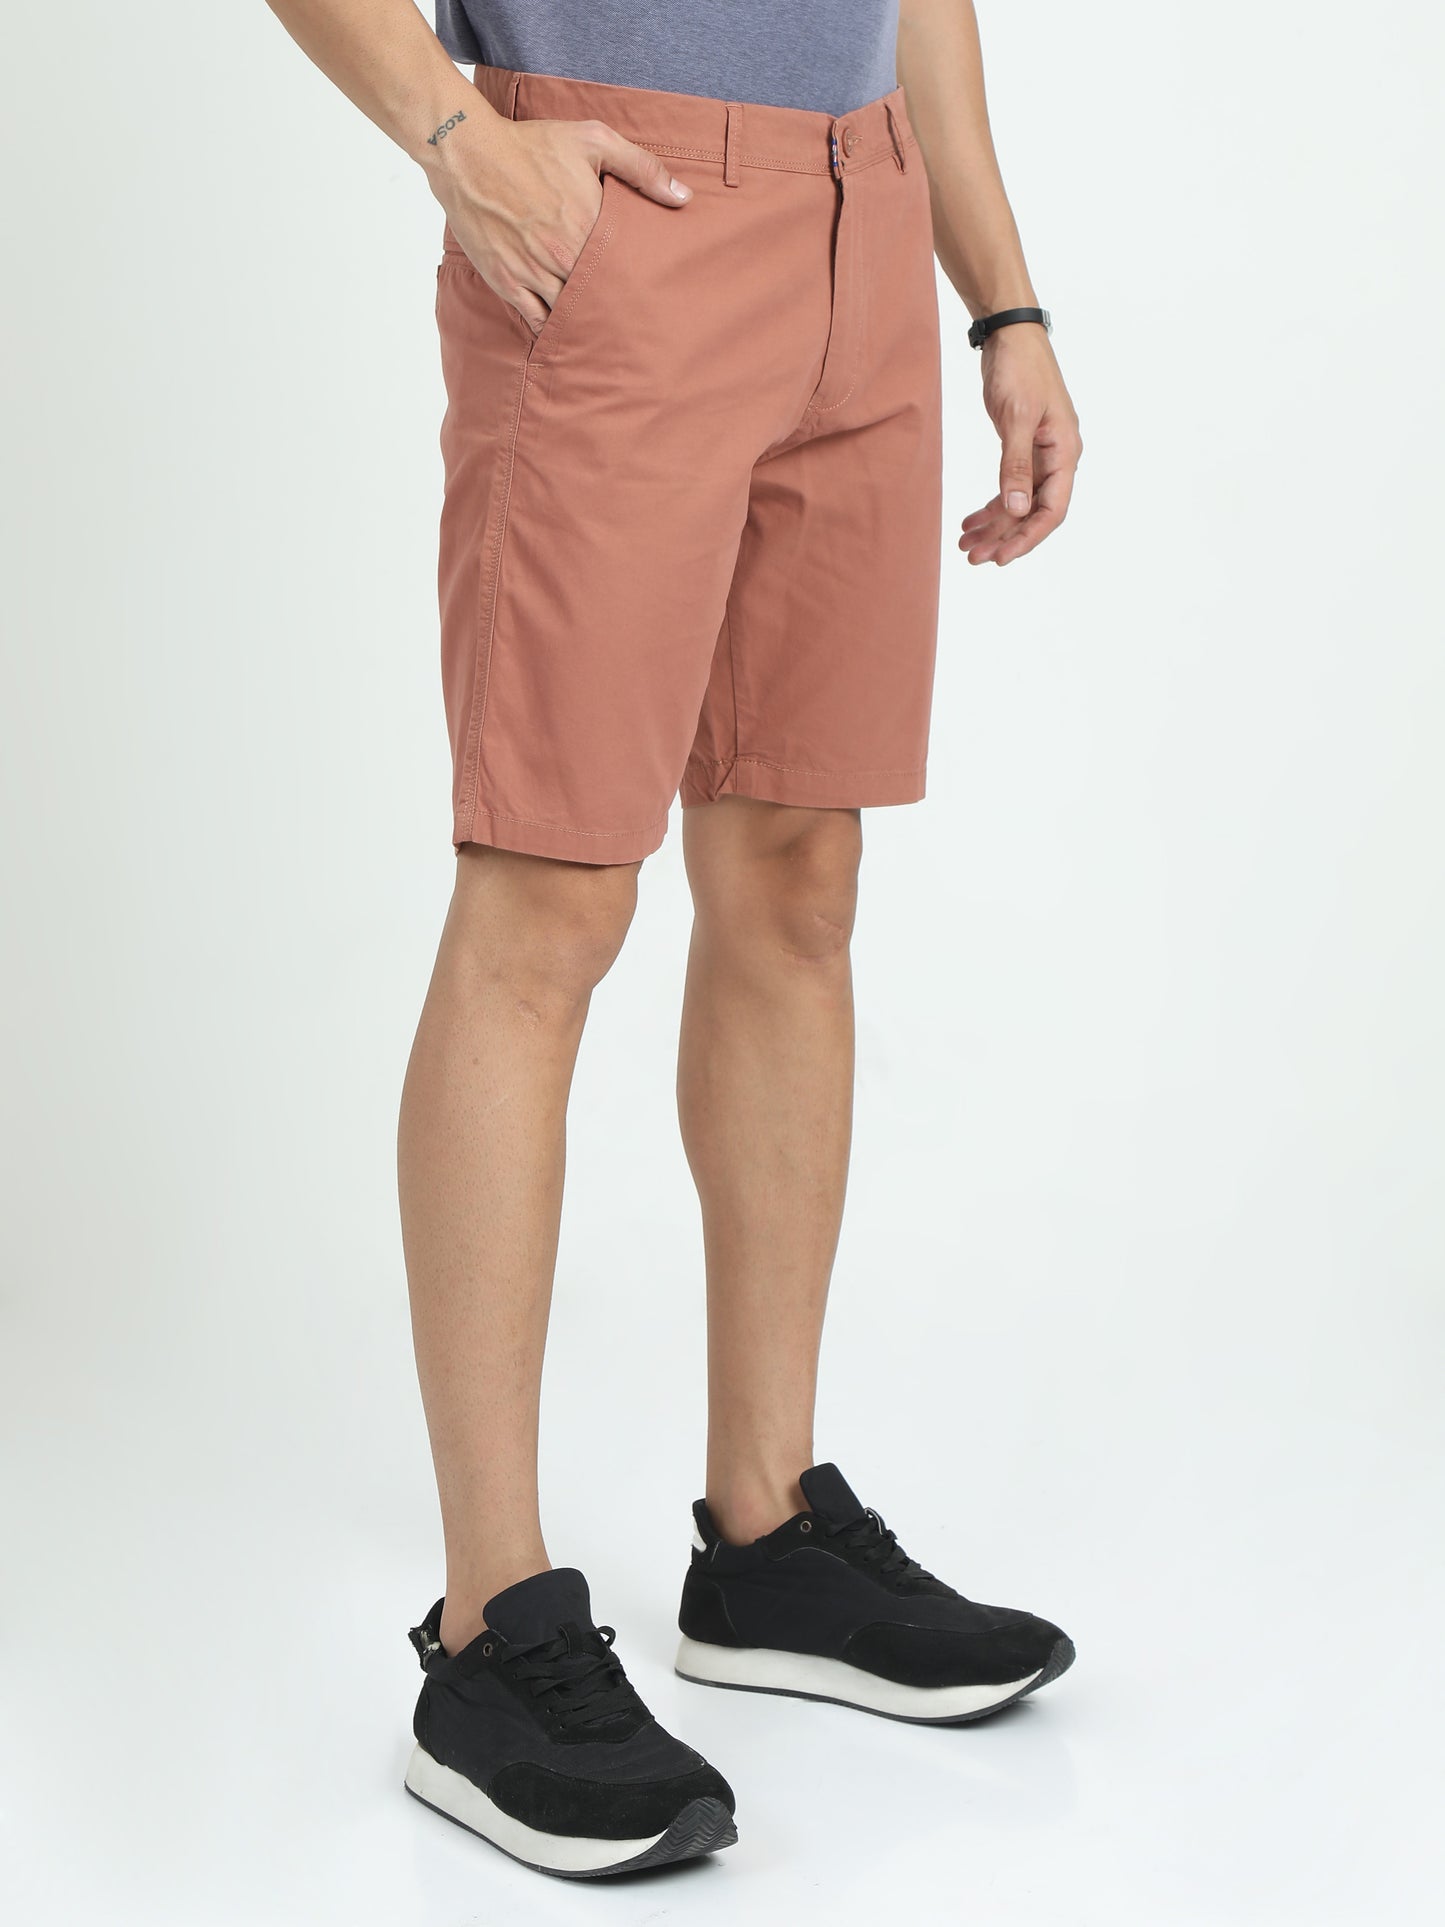 ALL DAY EVERYDAY SHORTS-SEA PINK